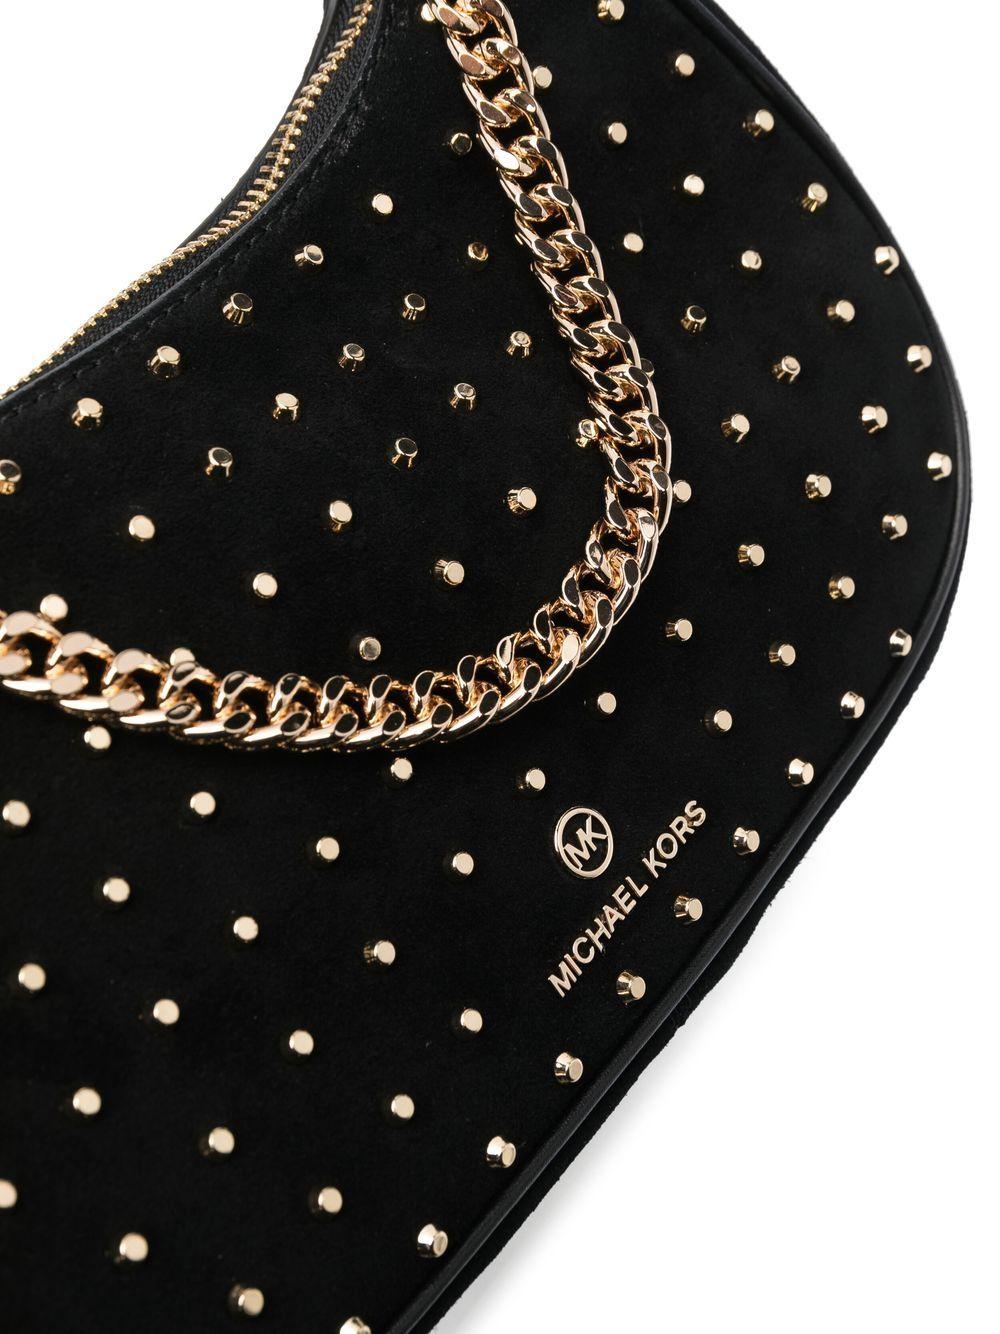 Michael Kors Piper Studded Small Leather Pouchette - Macy's